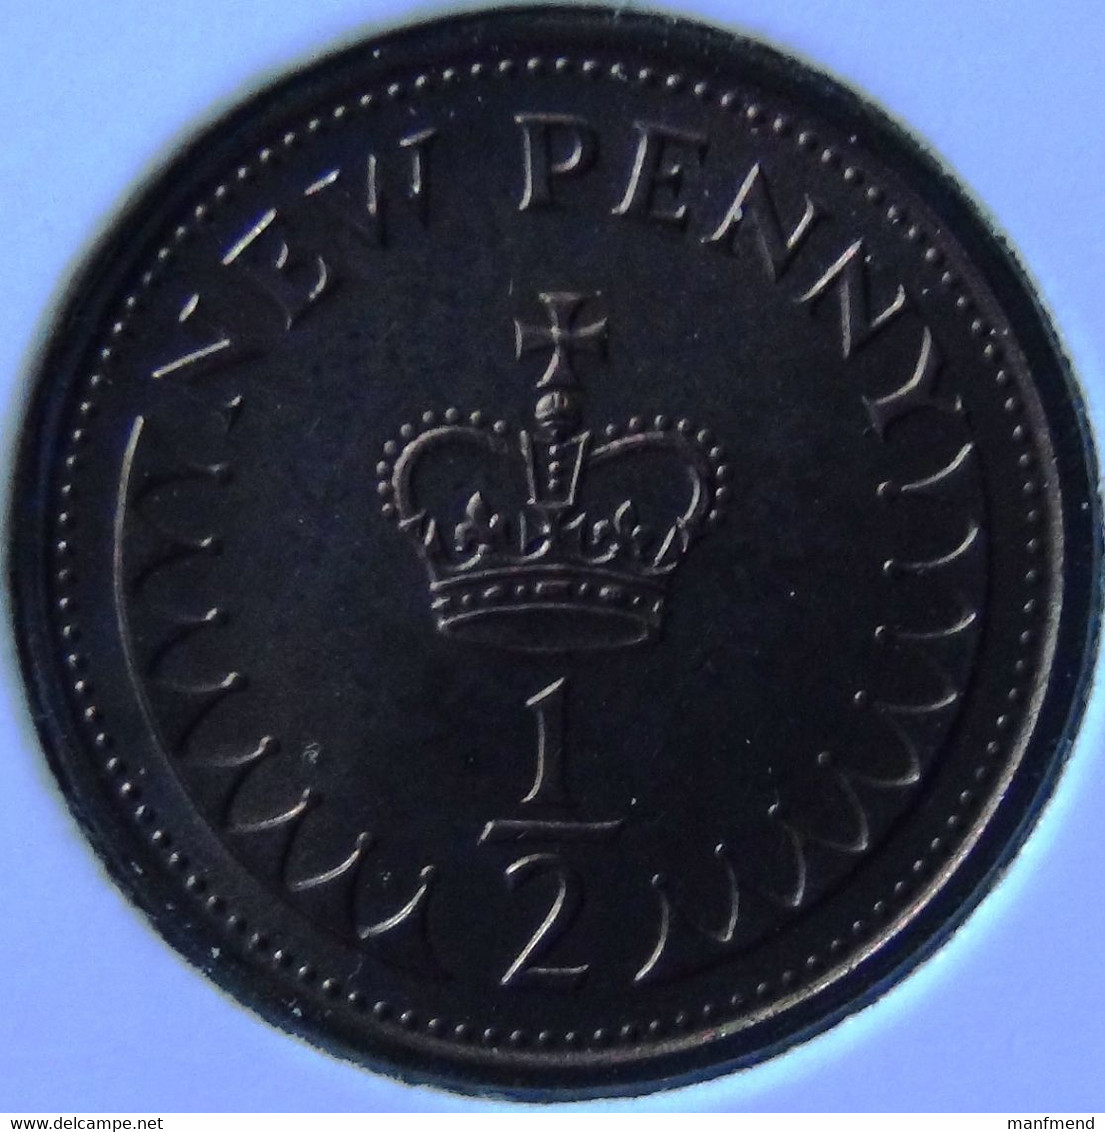 Great Britain - 1975 - 1/2 New Penny - KM 914 - Vz - 1/2 Penny & 1/2 New Penny